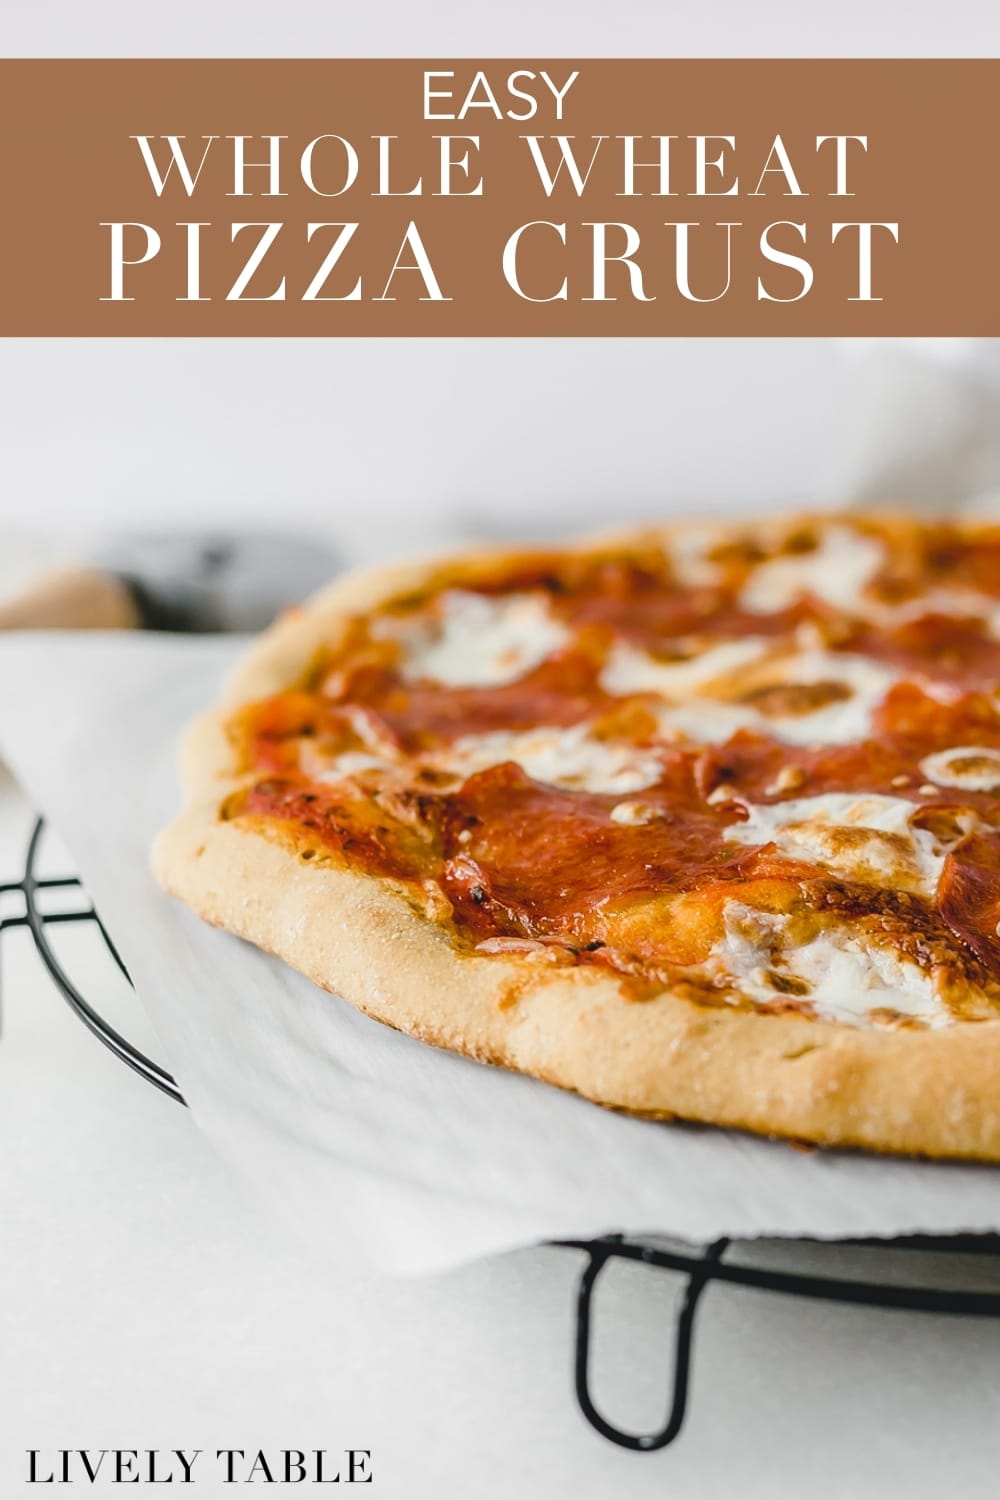 Easy Whole Wheat Pizza Crust - Lively Table